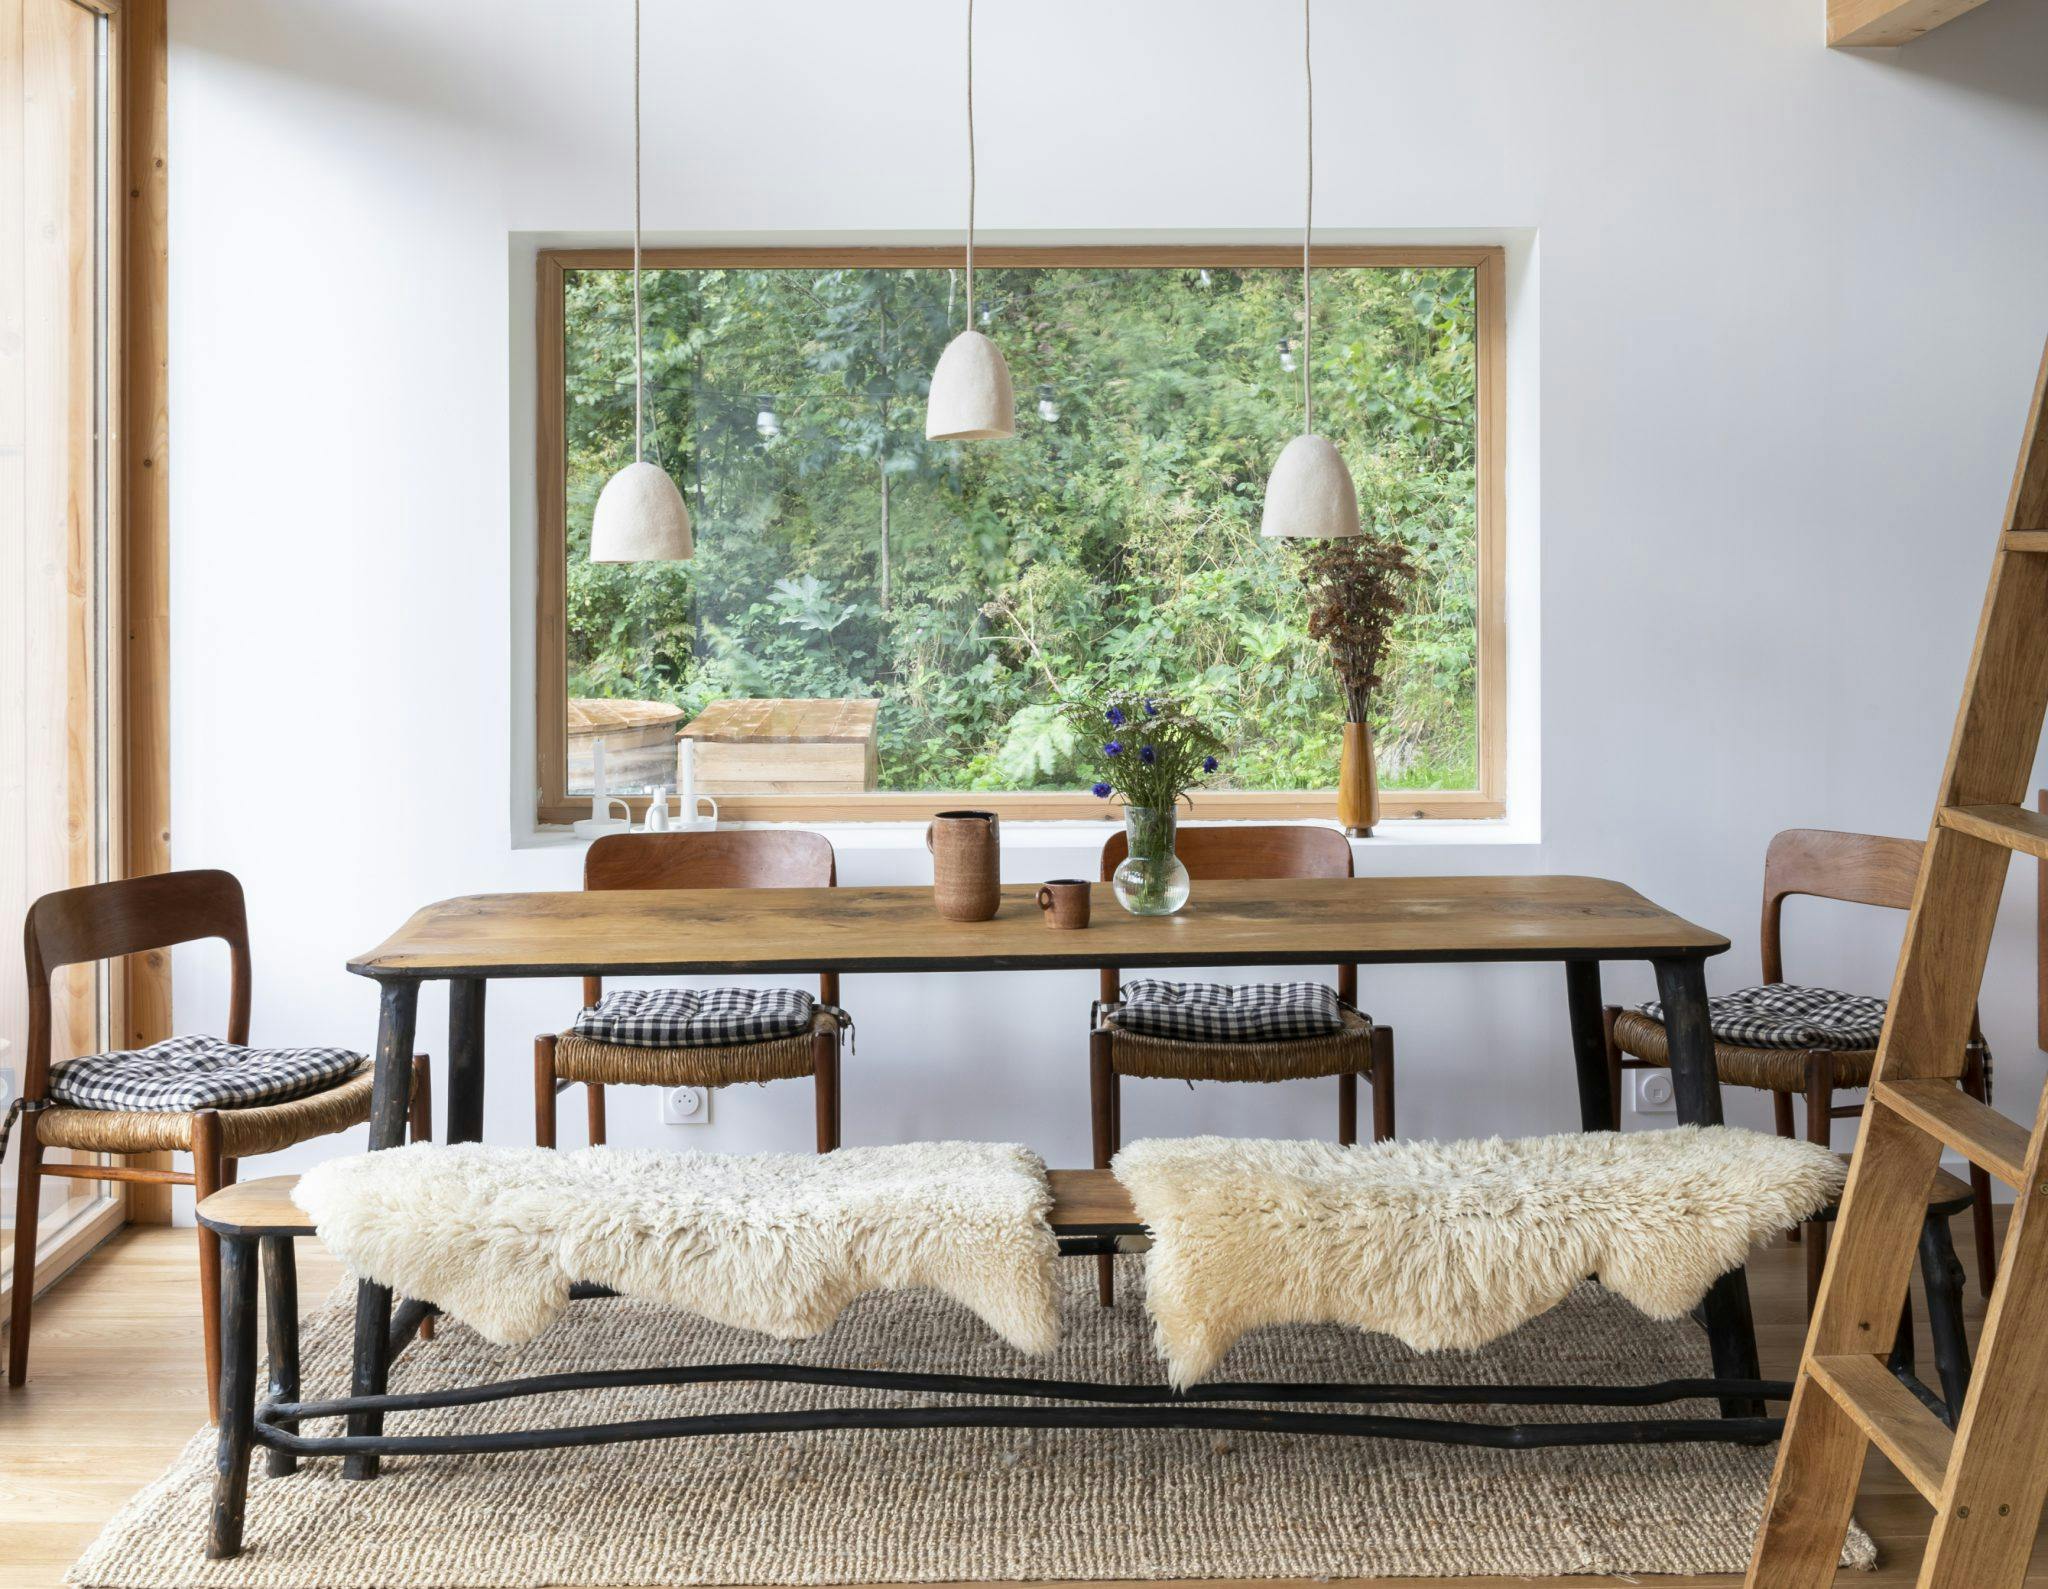 The wooden dining table of La Maison Refuge, the chairs, and the sheepskin fur throws